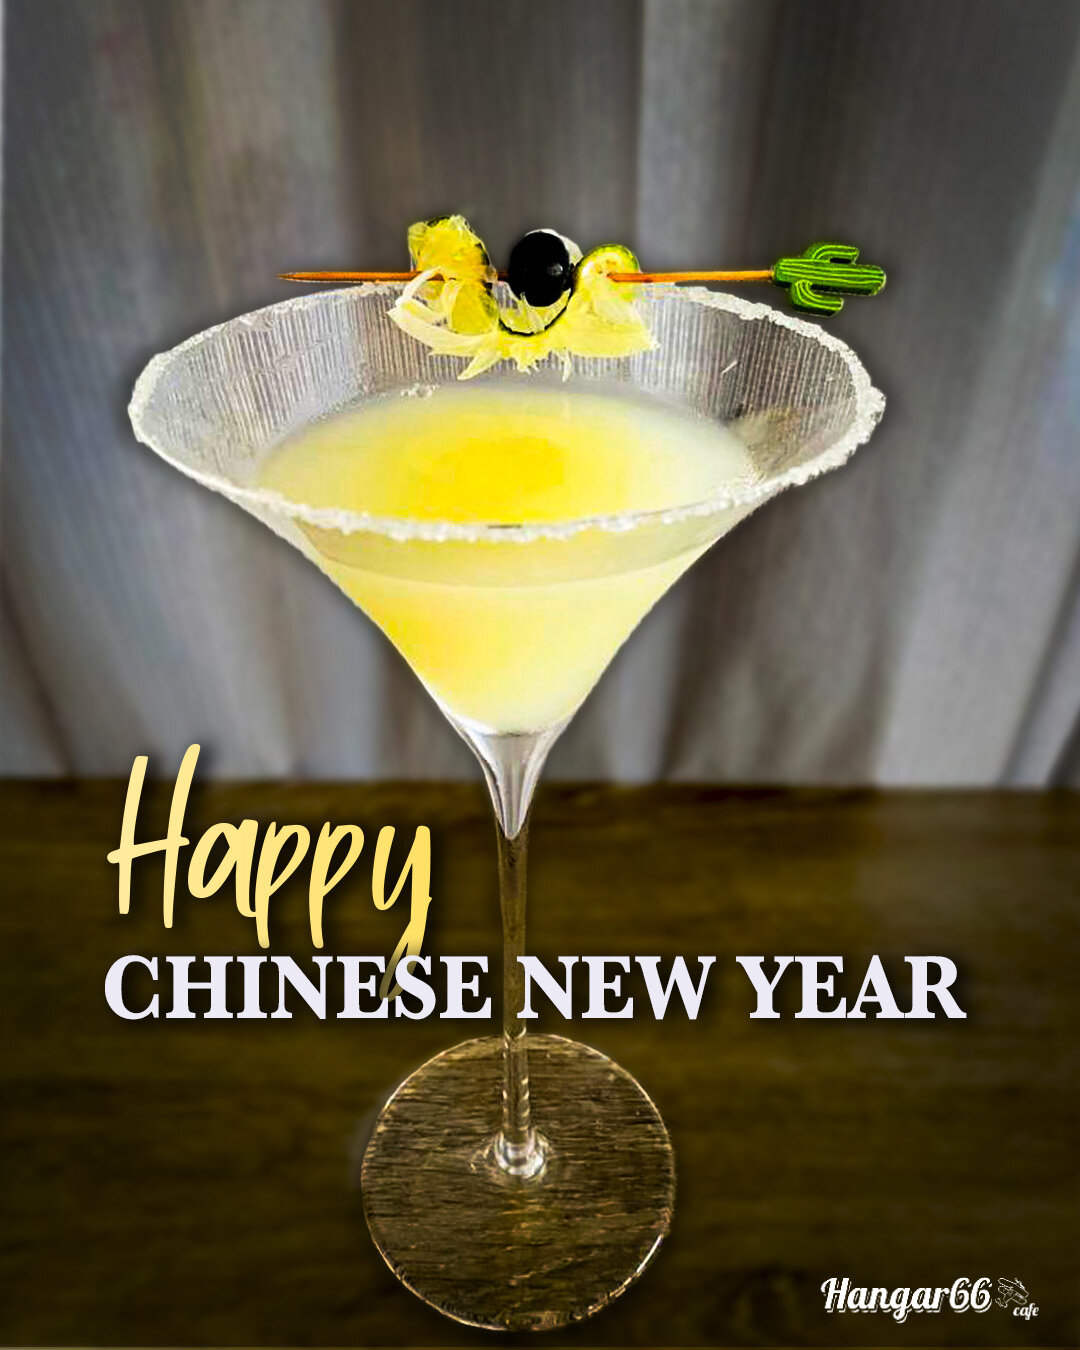 Here's to raising a glass to a happy and prosperous Chinese New Year! 🍸🐰

May the Year of the Rabbit bring good fortune, happiness, and health to all. We hope that you have the chance to celebrate with loved ones and make lasting memories.
.
.
#Han